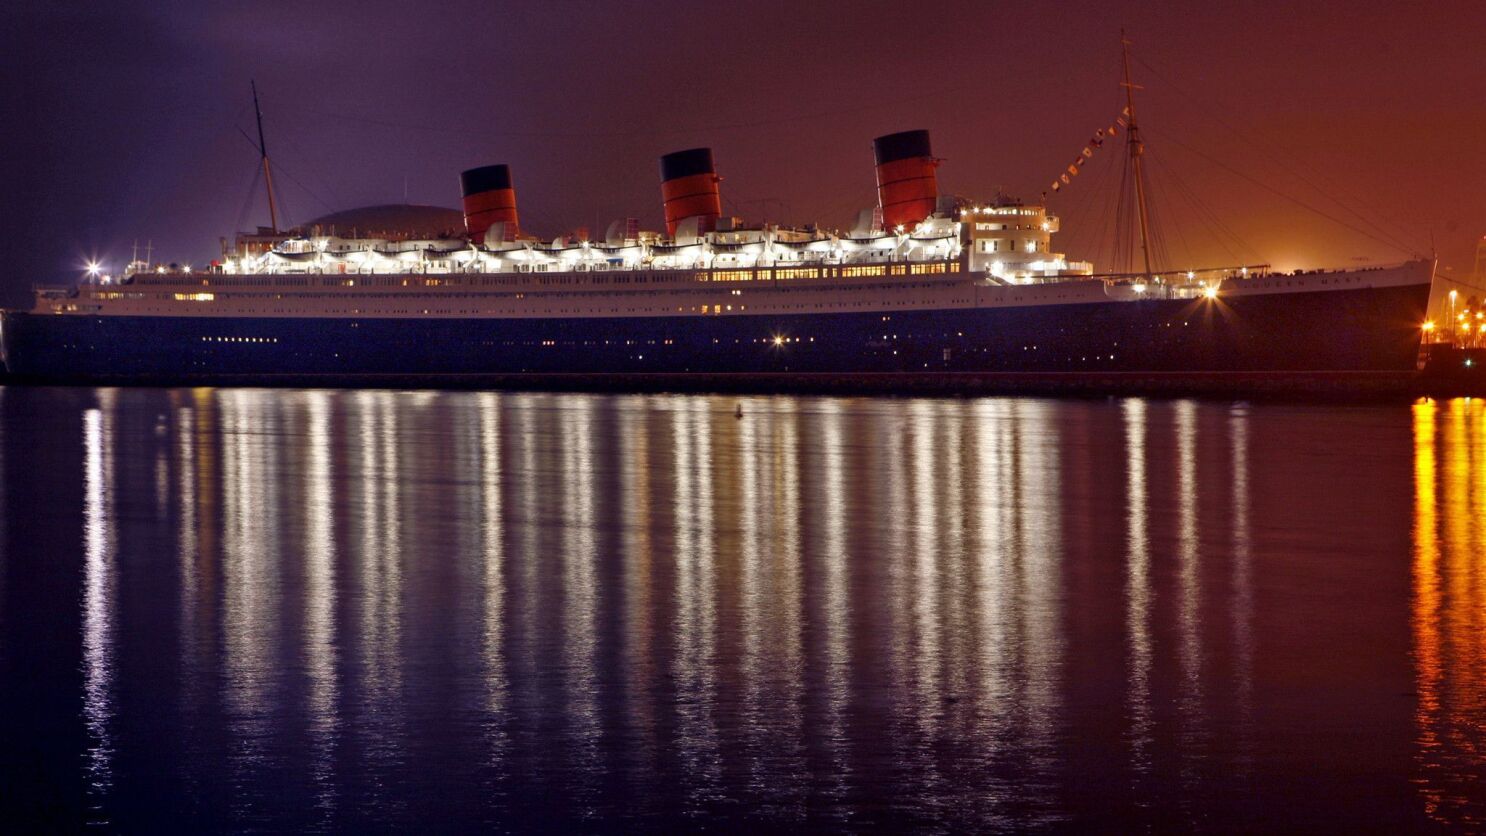 Hoping To Draw Guests The Queen Mary Offers Haunted Room Starting Friday The 13th Los Angeles Times